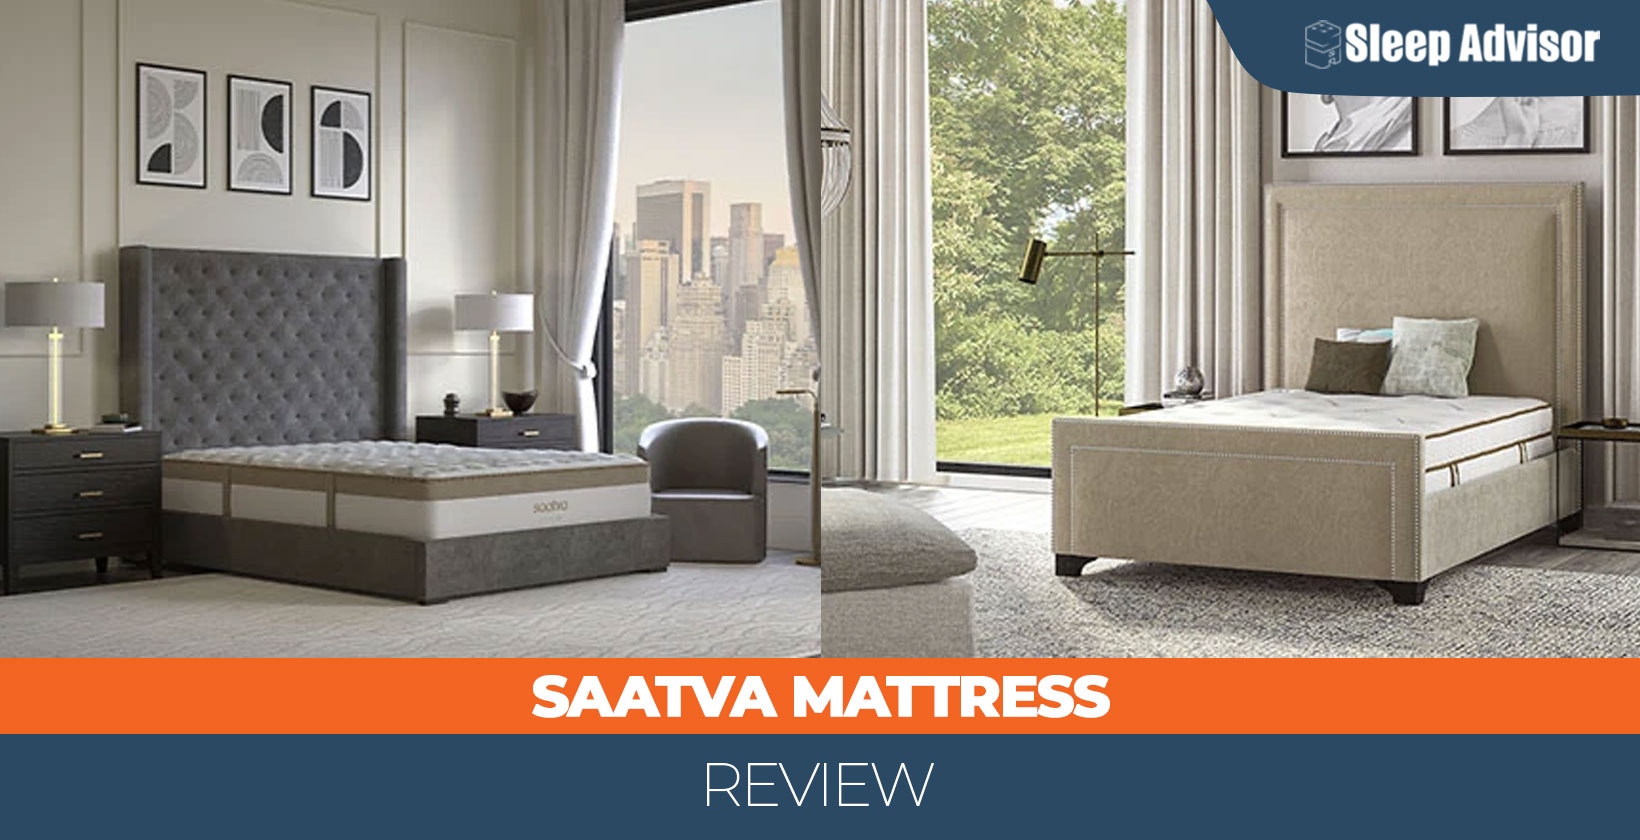 Saatva Mattress Review and Prices